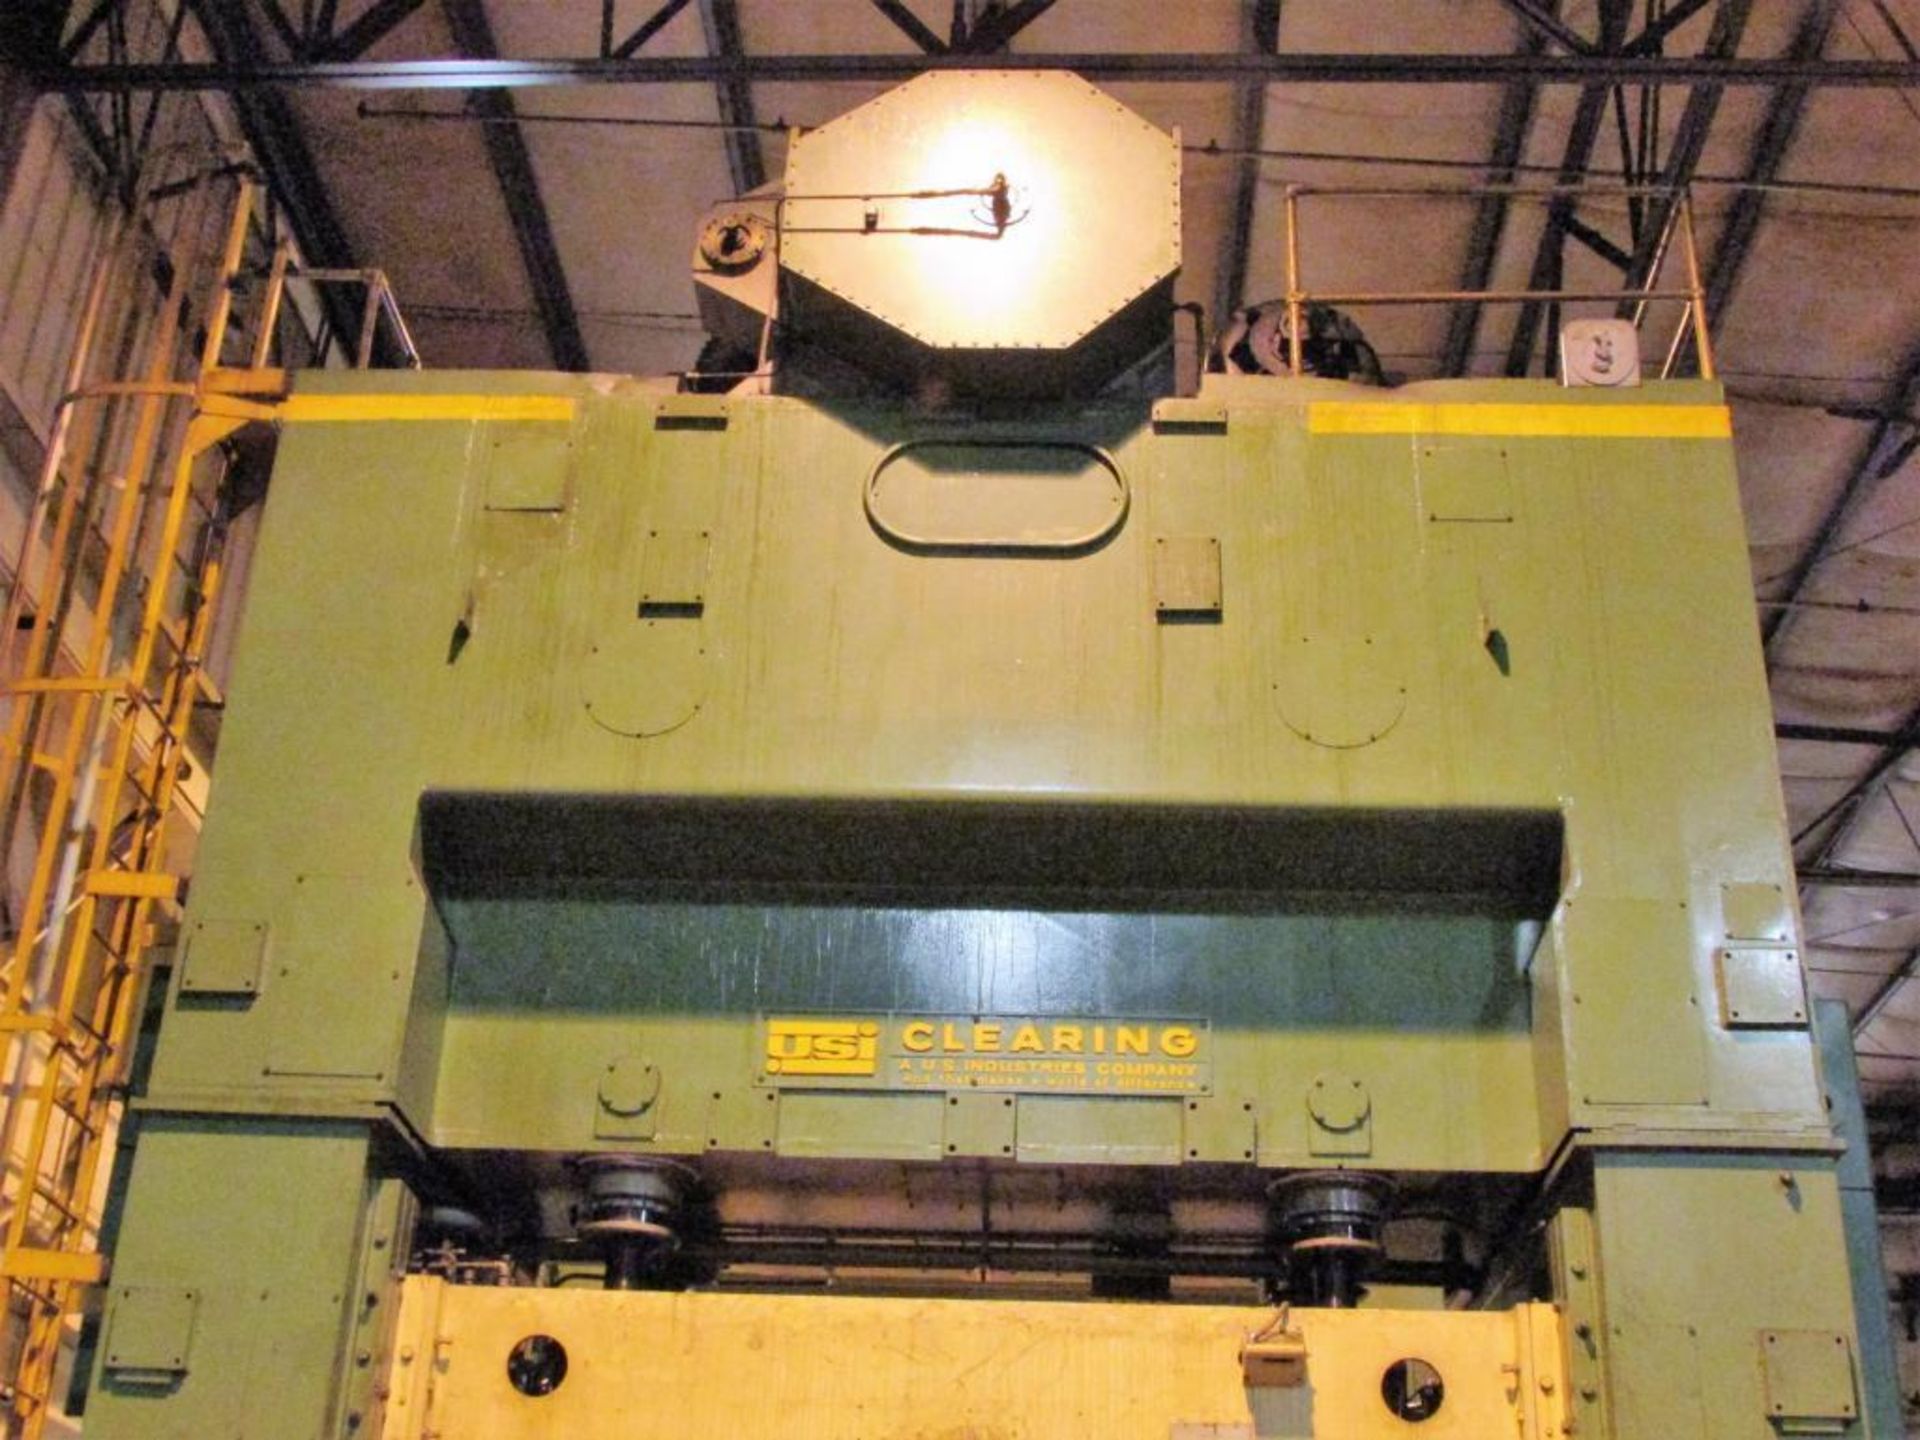 USI Clearing SE4-500-144-84 500 Ton Four Point Straight Side Press - Image 3 of 19